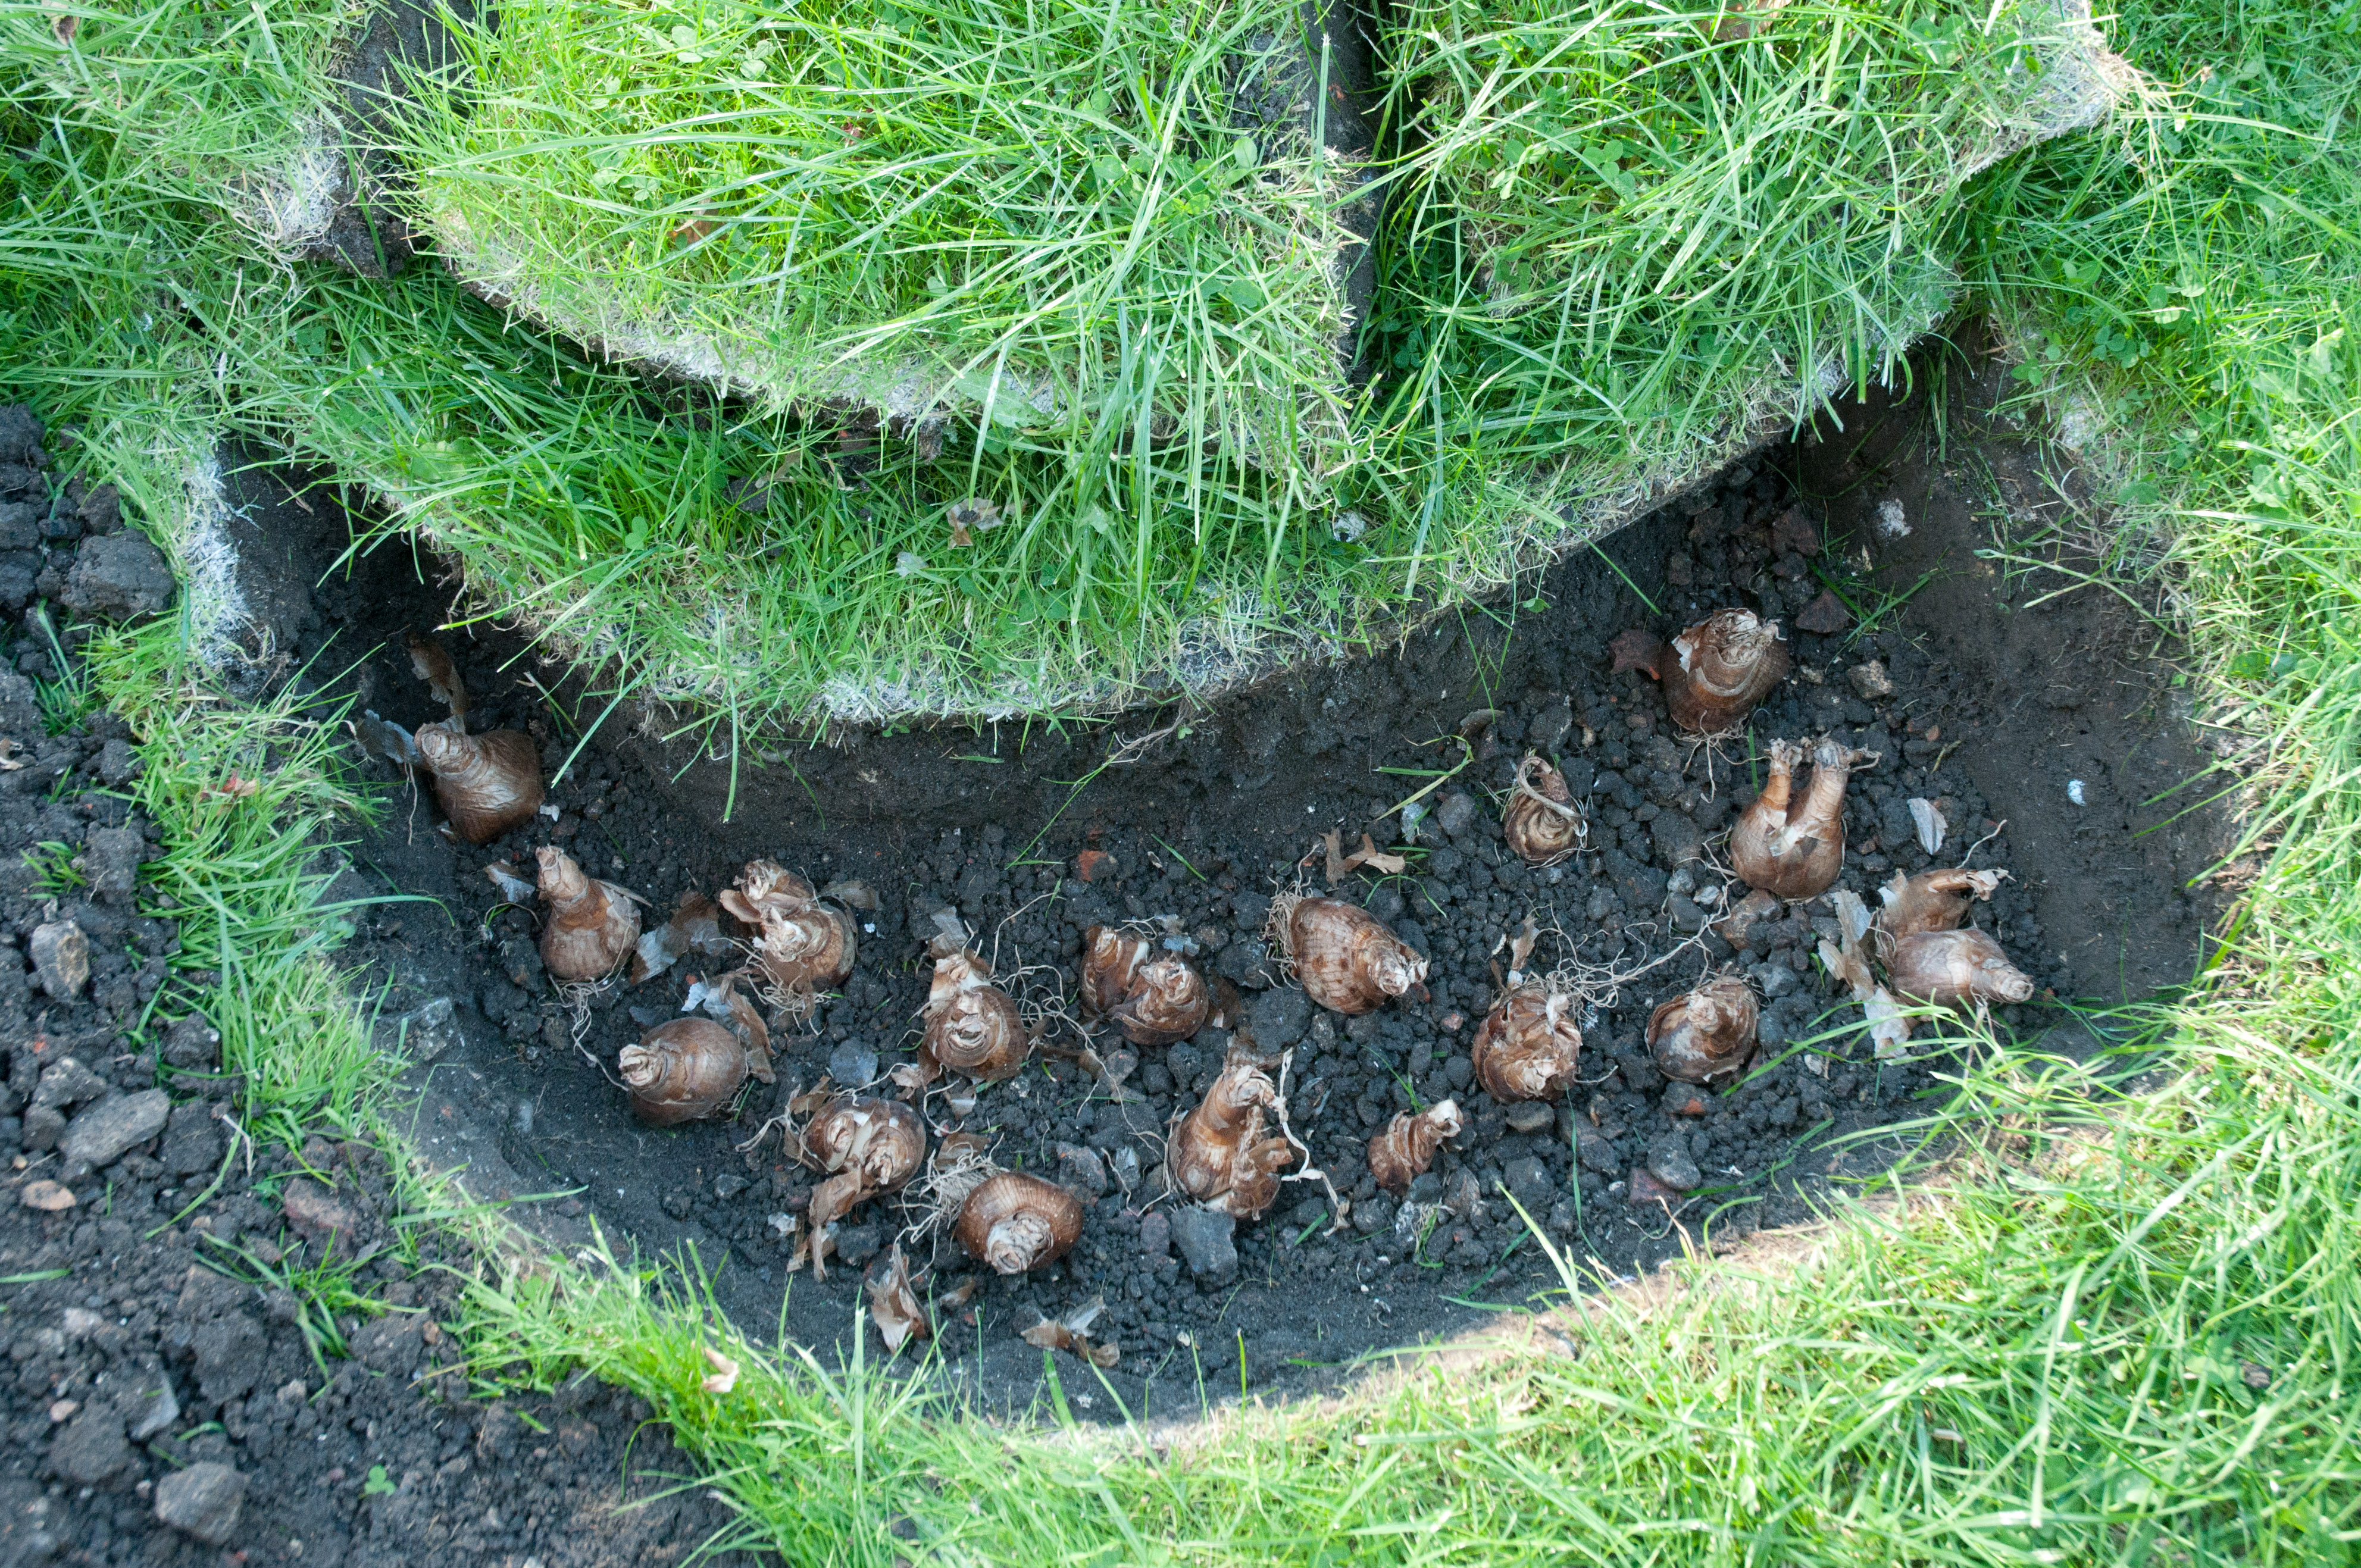 narcissi bulbs planted in a grassed area